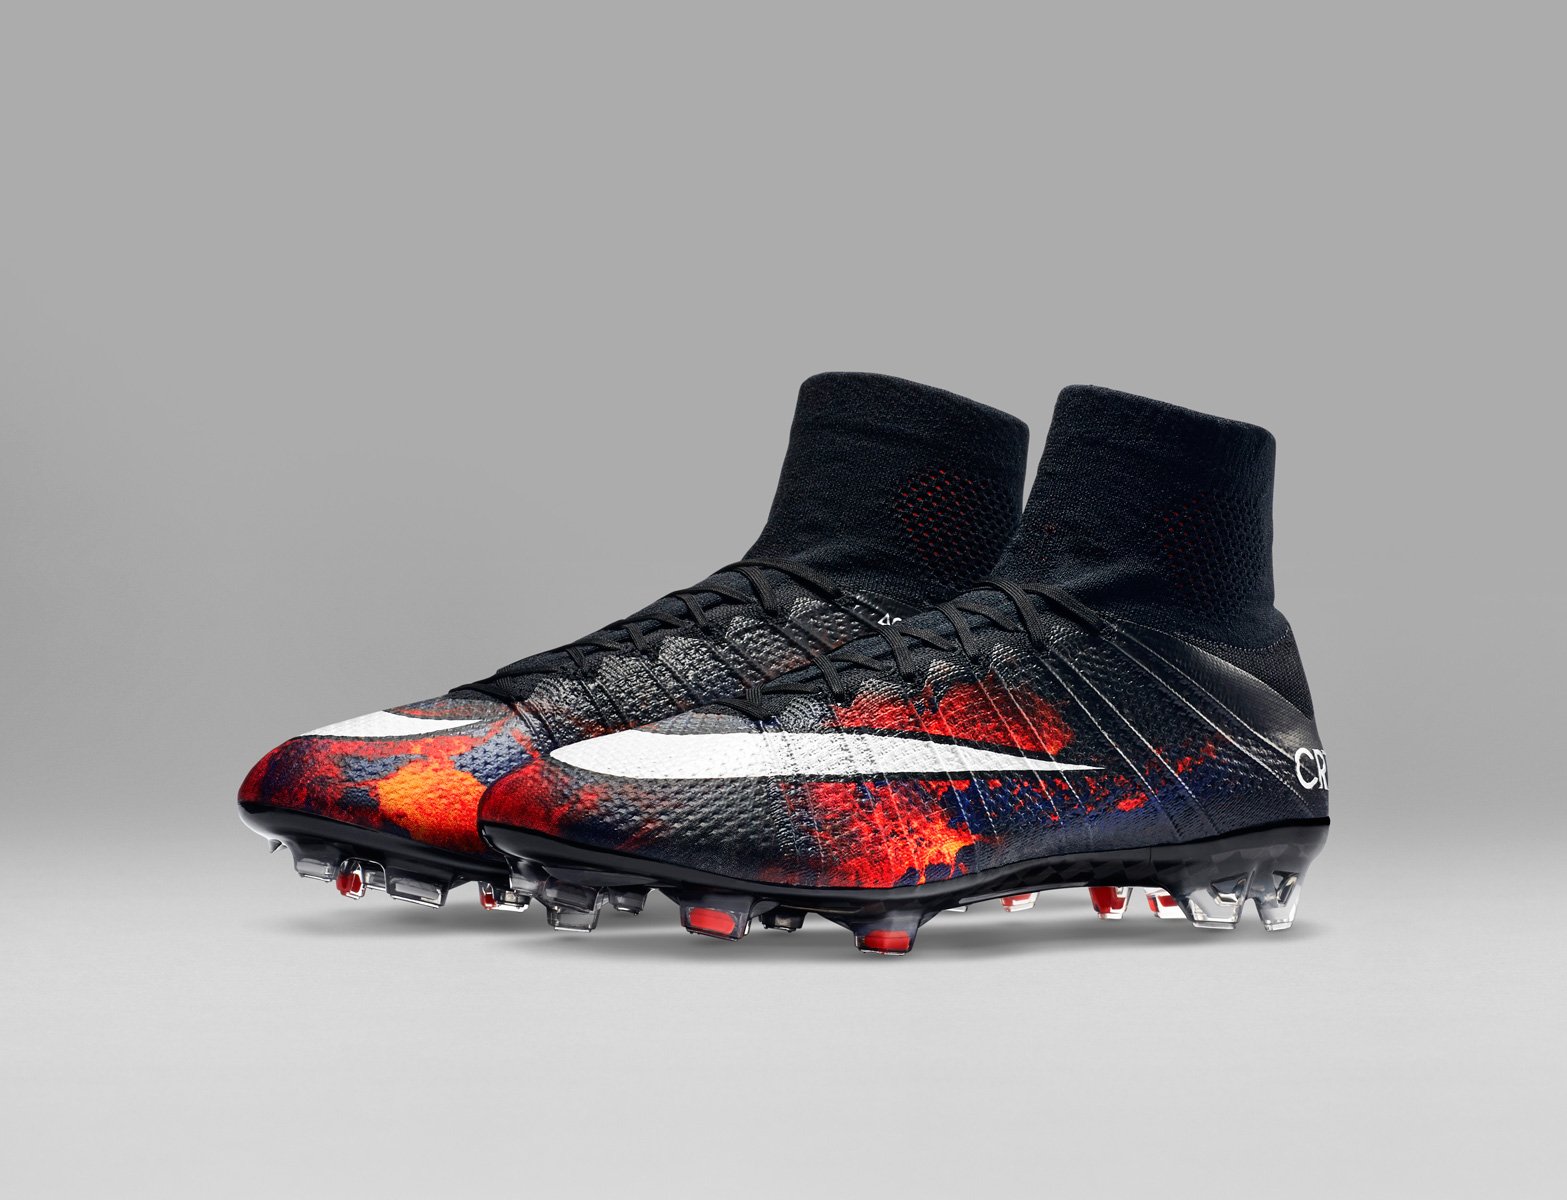 JD Football on Twitter: "The @Cristiano @NikeUK Mercurial Superfly CR7 Savage Beauty is coming to https://t.co/WnLWiW9DmZ https://t.co/9yAojATXPb" / Twitter